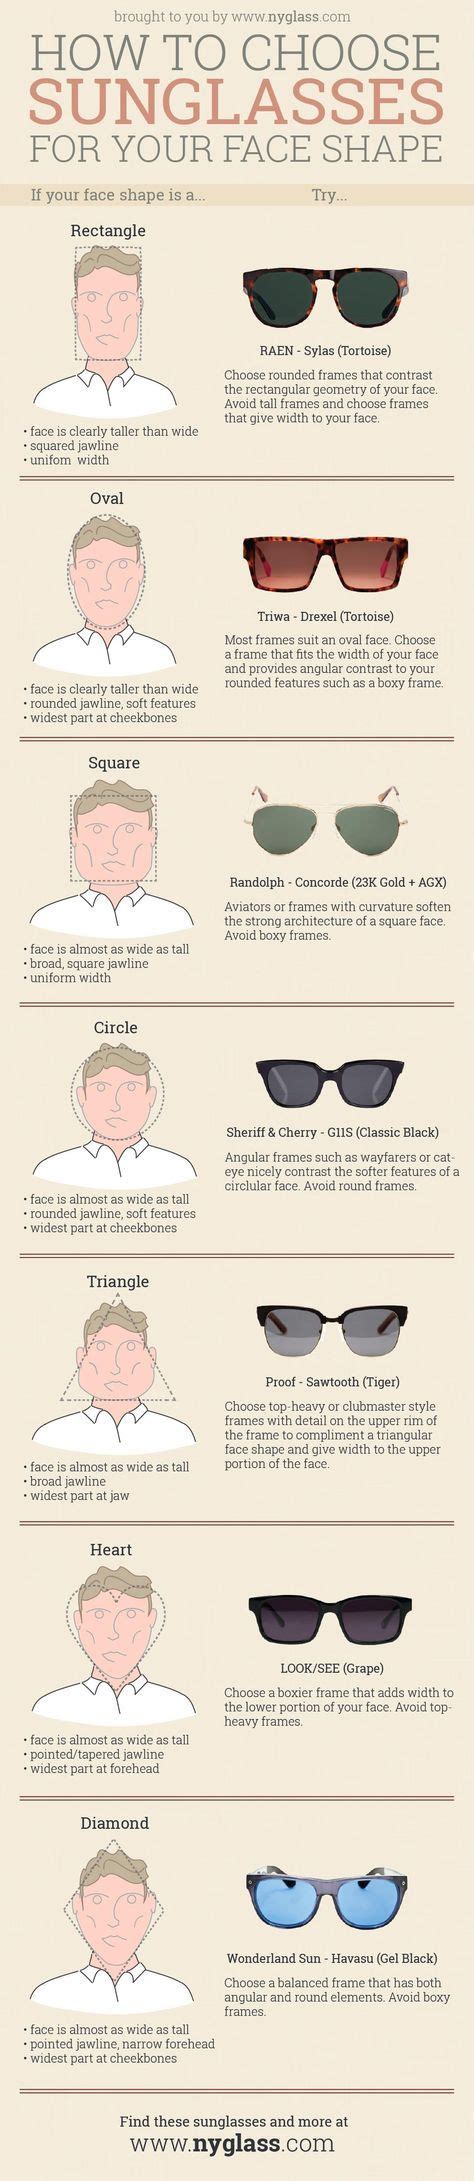 How To Choose Sunglasses For Your Face Shape Guide For Both Men And